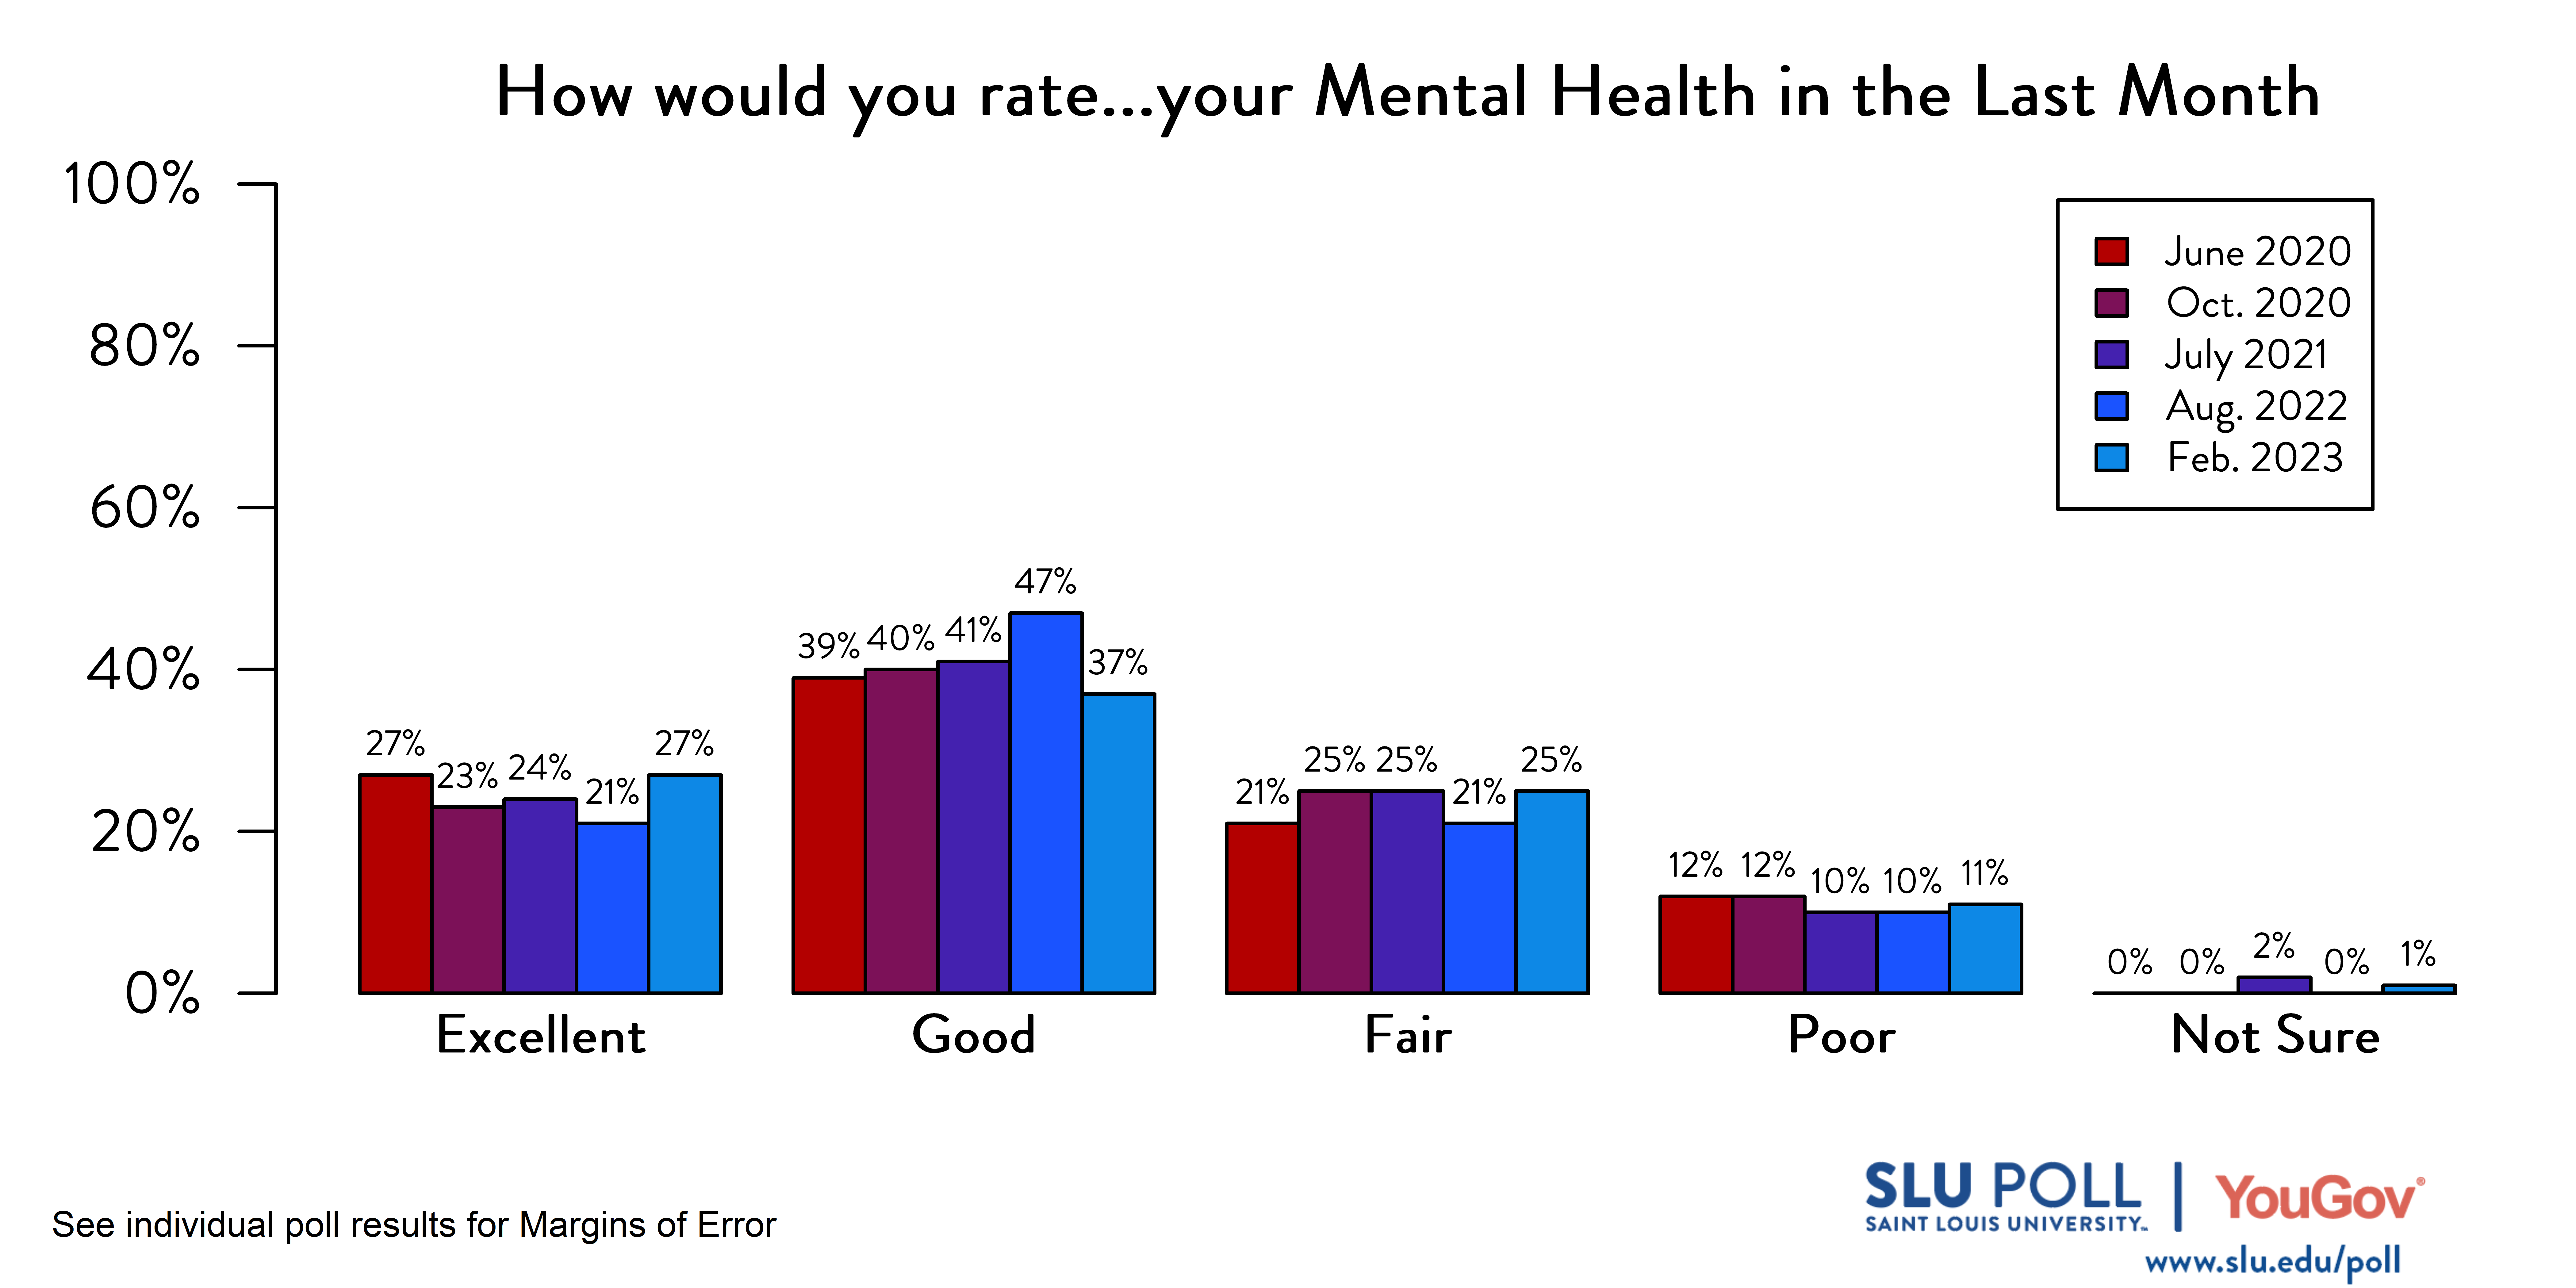 Likely voters' responses to 'How would you rate the condition of the following: Your mental health in the last month?'. June 2020 Voter Responses 27% Excellent, 39% Good, 21% Fair, 12% Poor, and 0% Not sure. October 2020 Voter Responses: 23% Excellent, 40% Good, 25% Fair, 12% Poor, and 0% Not sure. July 2021 Voter Responses: 24% Excellent, 41% Good, 25% Fair, 10% Poor, and 2% Not sure. August 2022 Voter Responses: 21% Excellent, 47% Good, 21% Fair, 10% Poor, and 0% Not sure. February 2023 Voter Responses: 27% Excellent, 37% Good, 25% Fair, 11% Poor, and 1% Not sure.